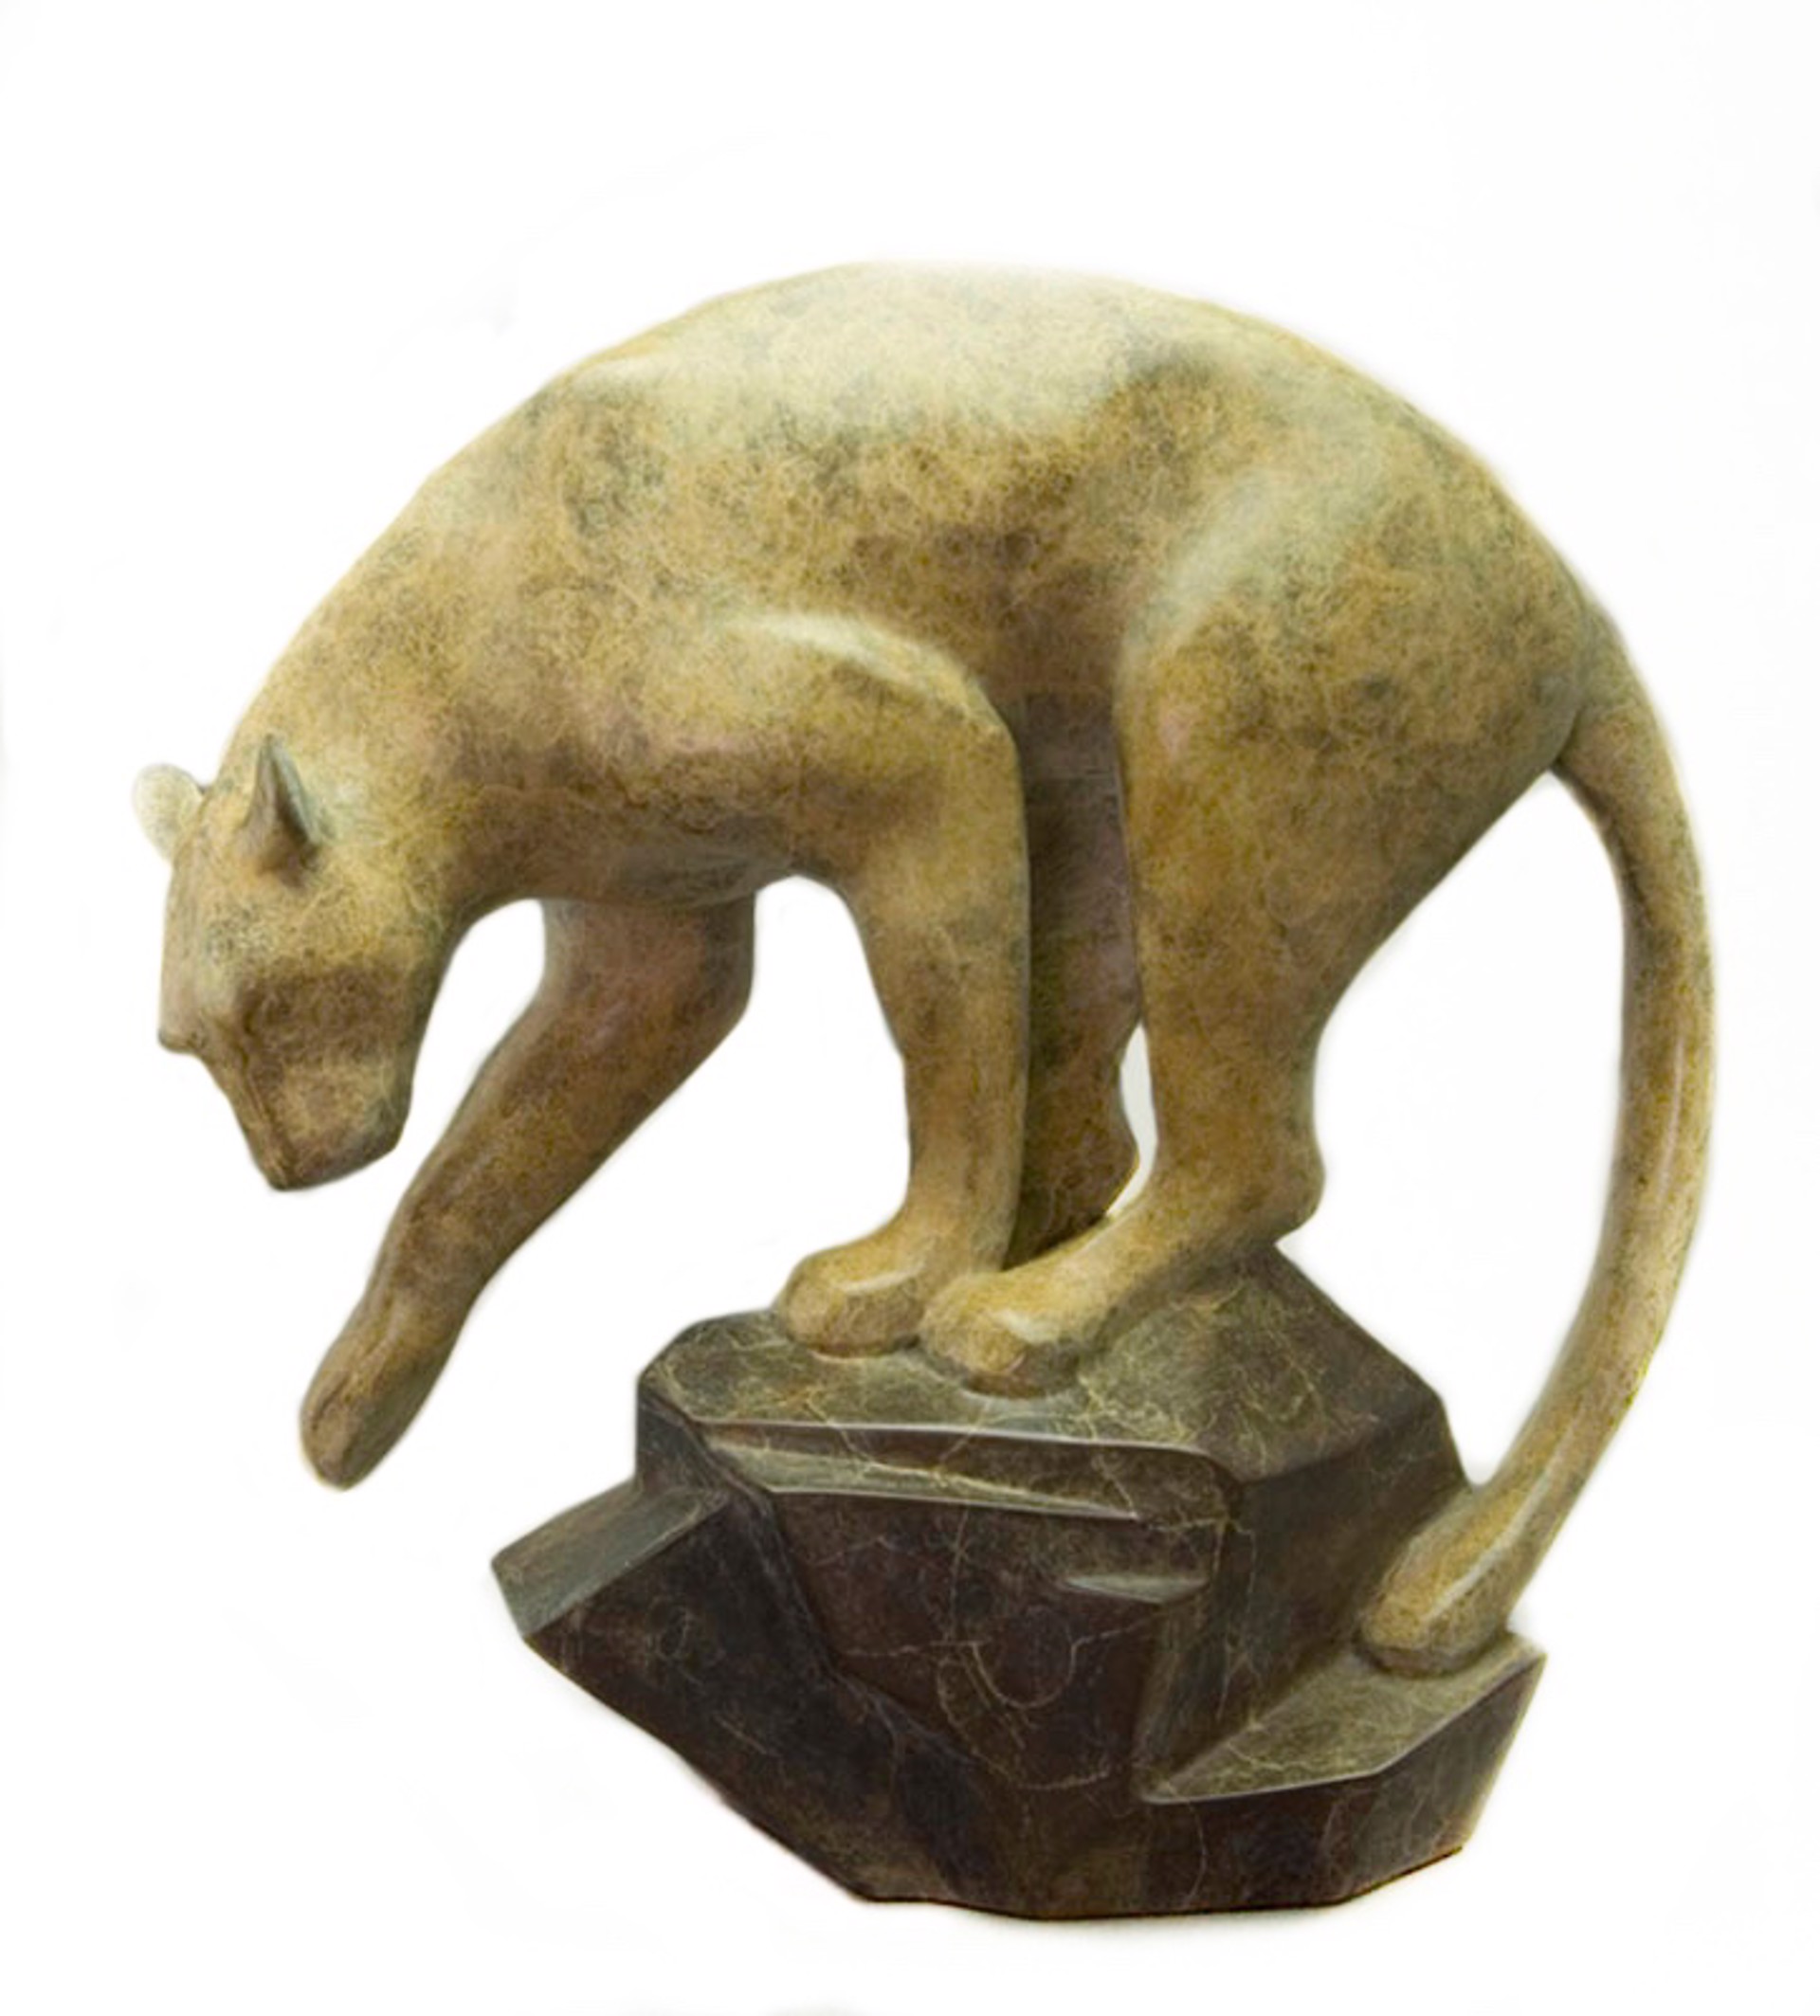 Bronze Sculpture of A Puma Mid Step Down A Rock With An Arched Back, By Kristine Taylor